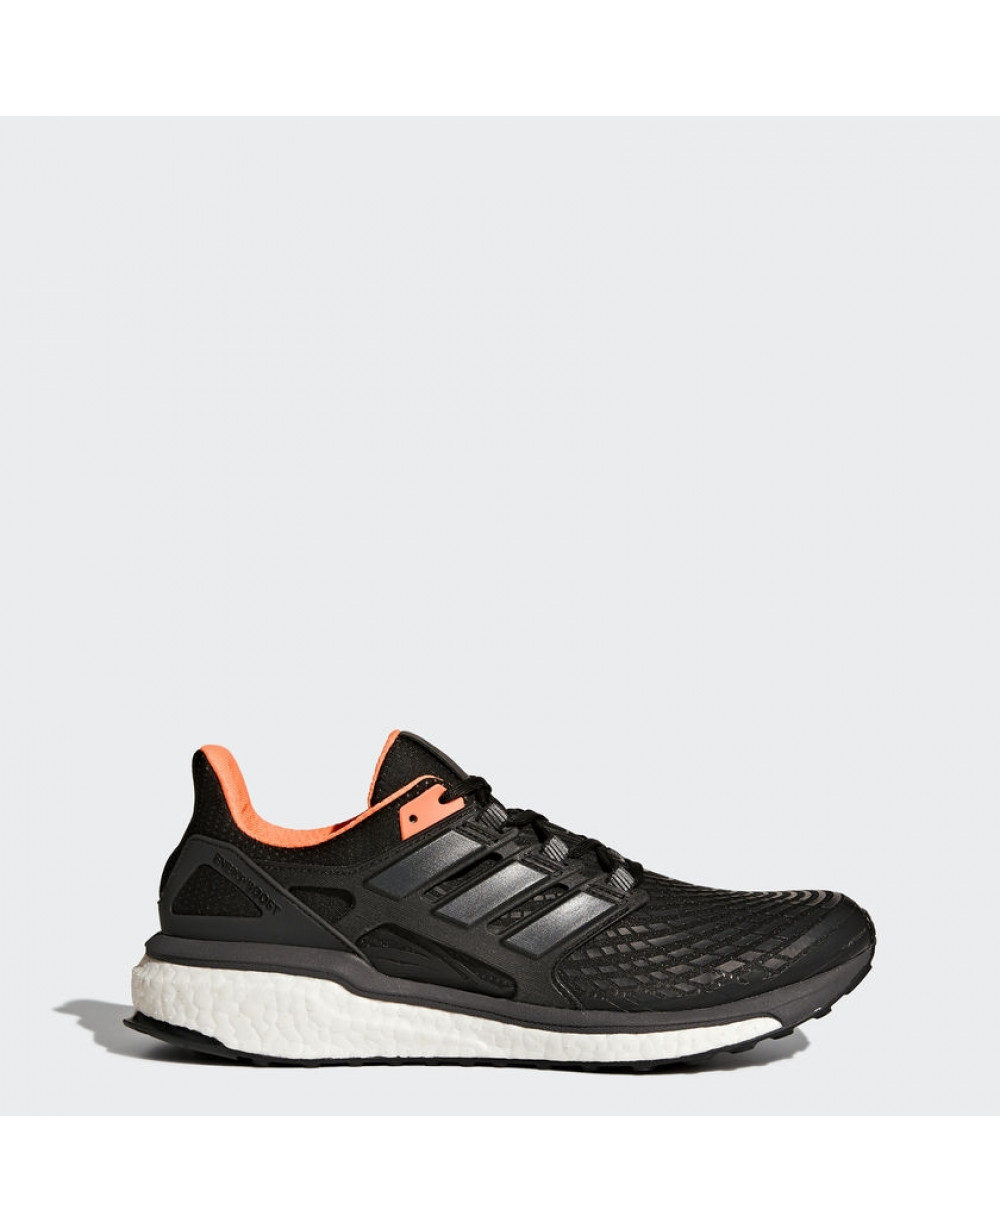 adidas energy boost shoes